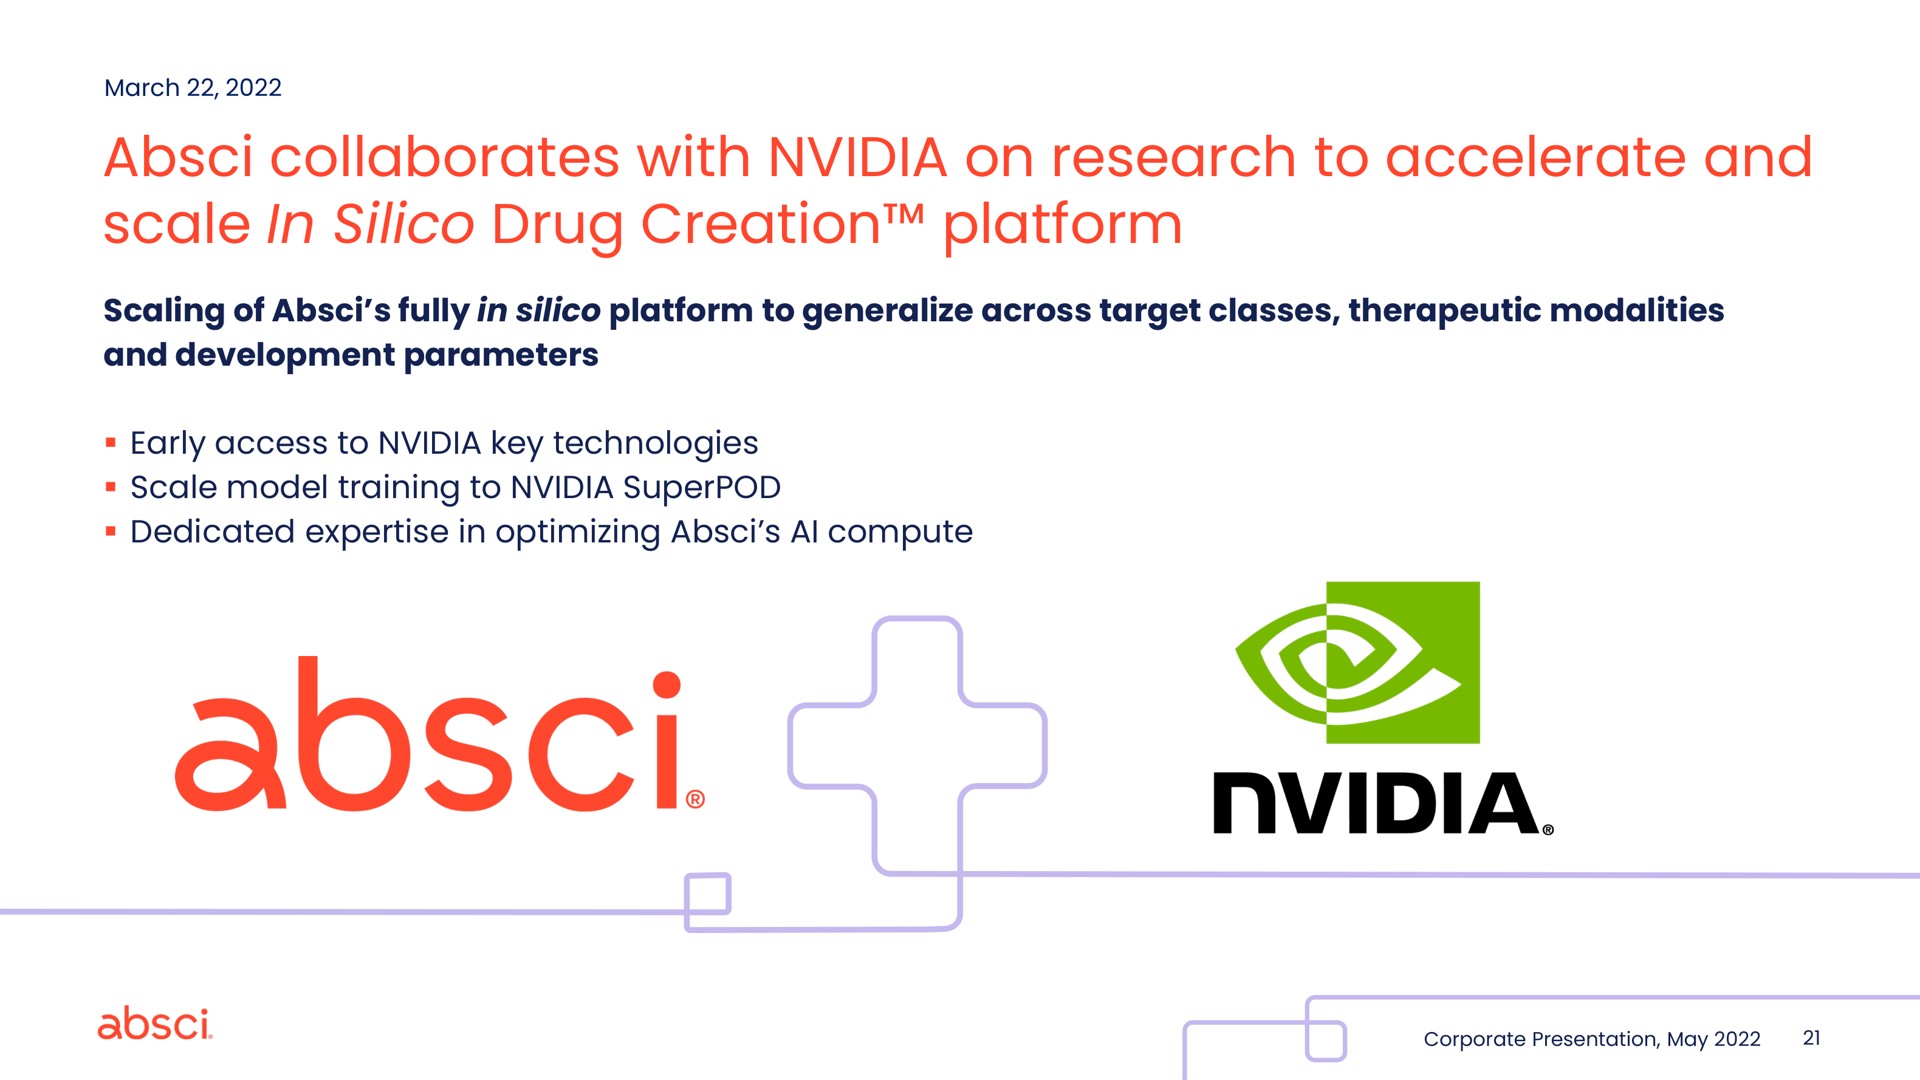 collaborates with on research to accelerate and scale in silico drug creation platform | Absci